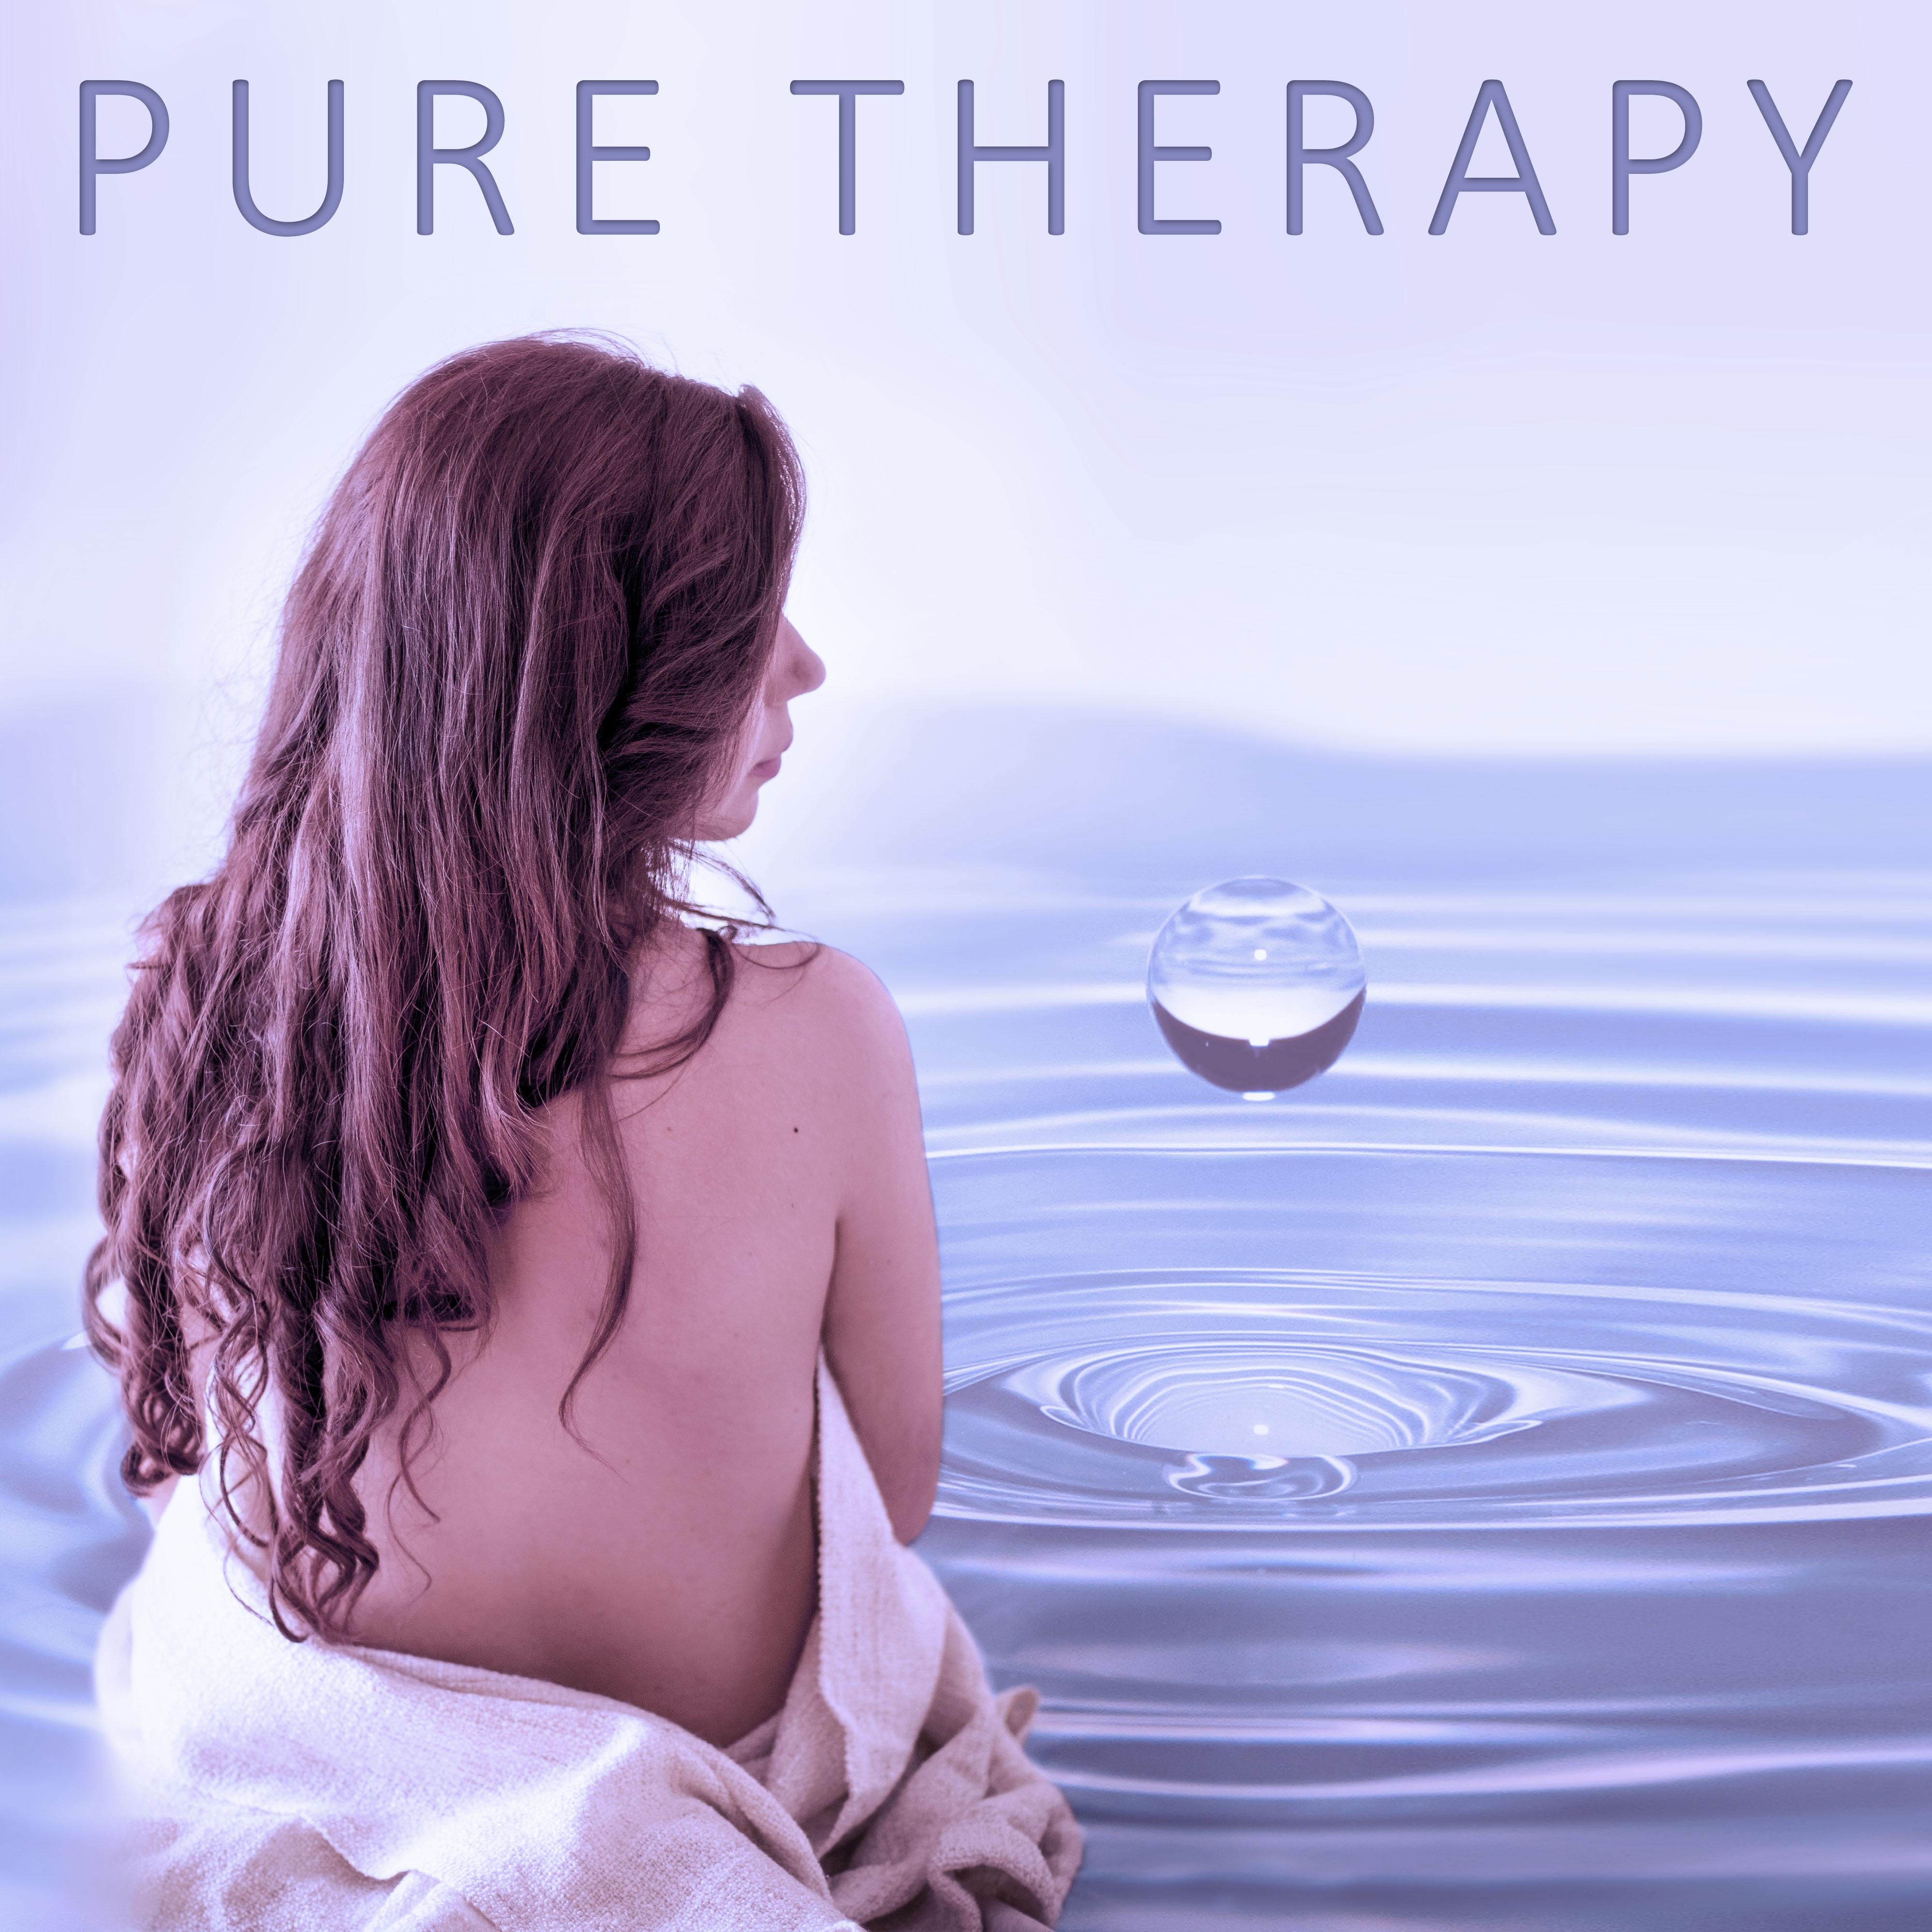 Pure Therapy – Relaxing Music, Pure Massage, Nature Sounds, Calmness, Pure Relaxation, Peaceful Music, Spa